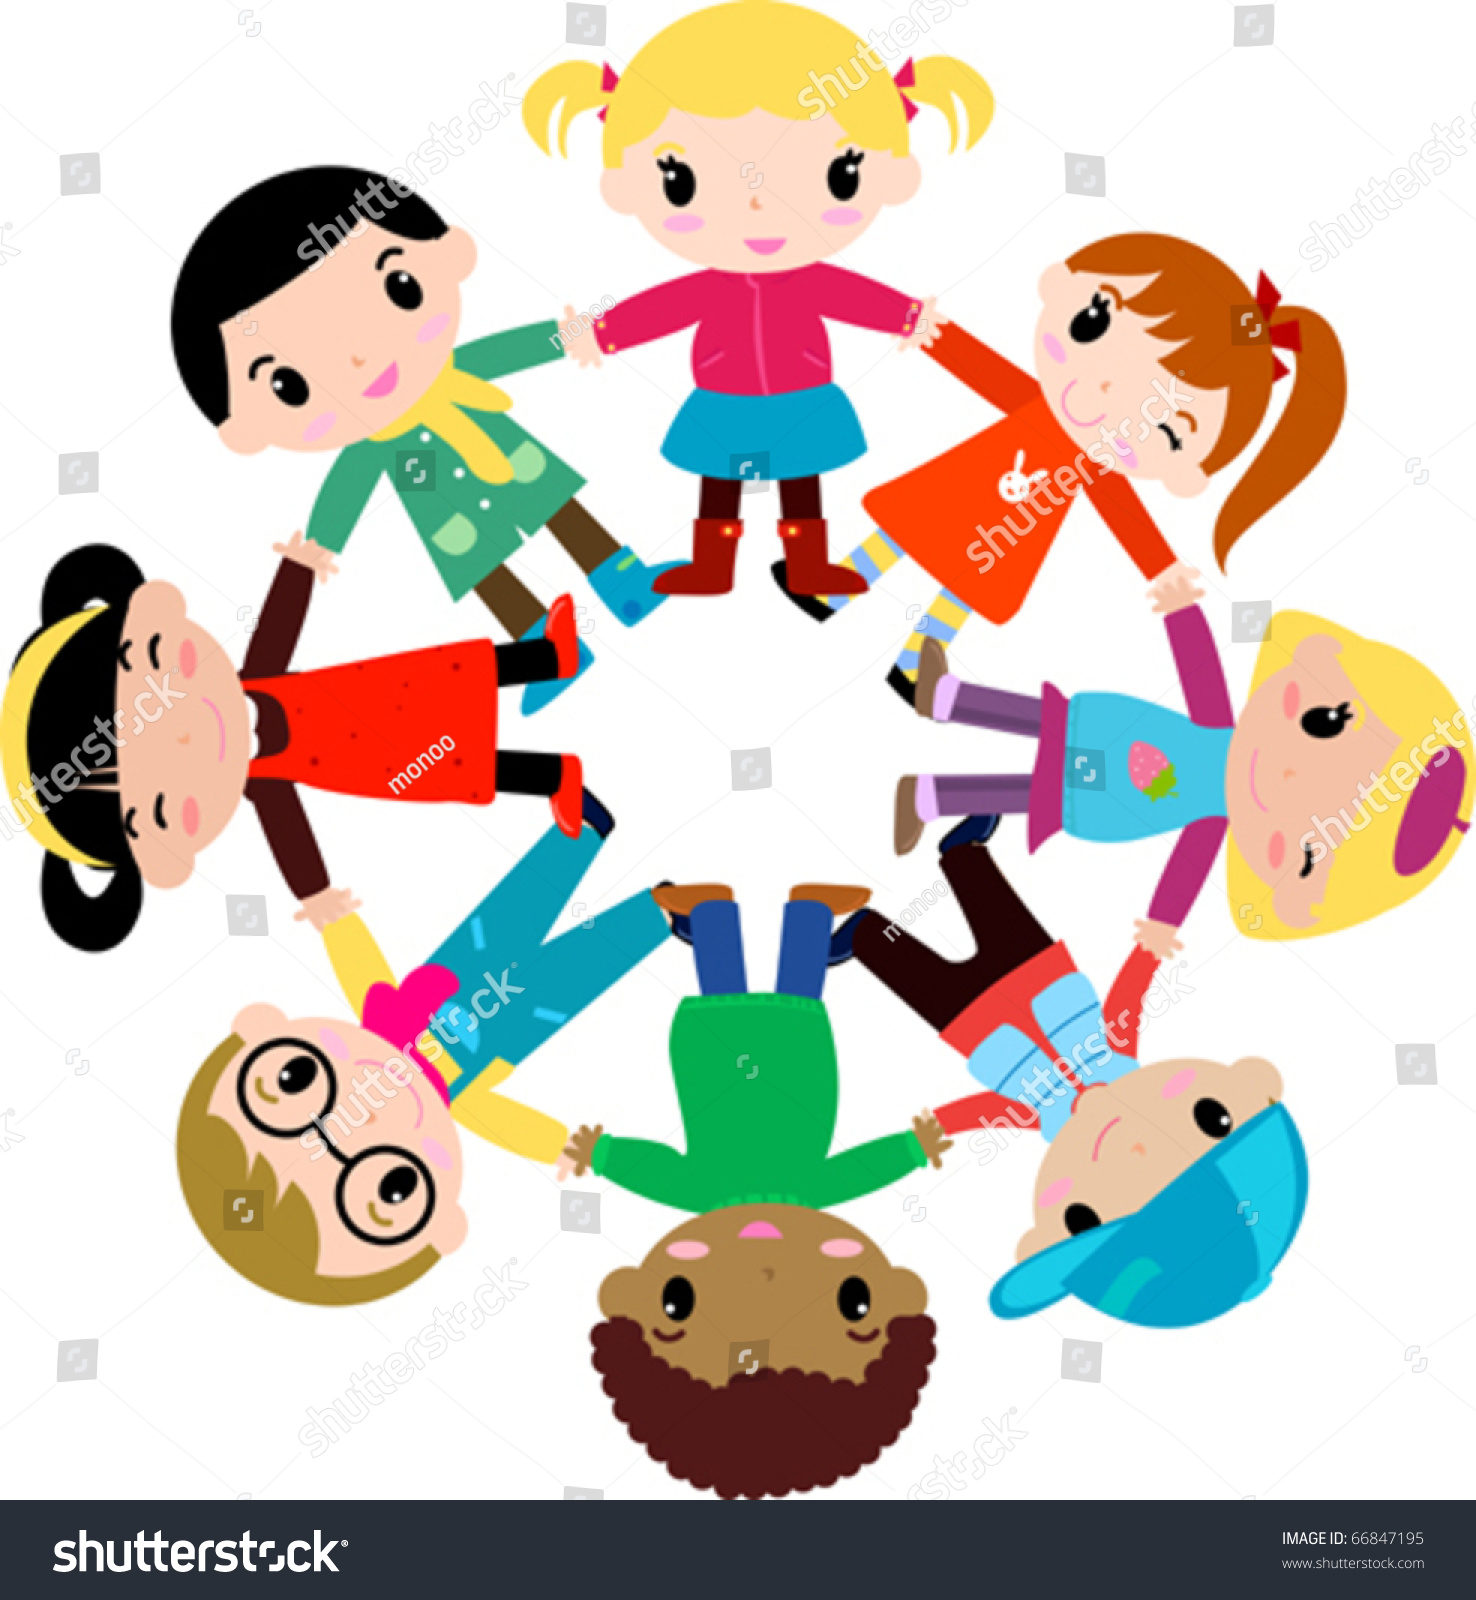 Group Of Playing Children Hand In Hand Stock Vector Illustration ...